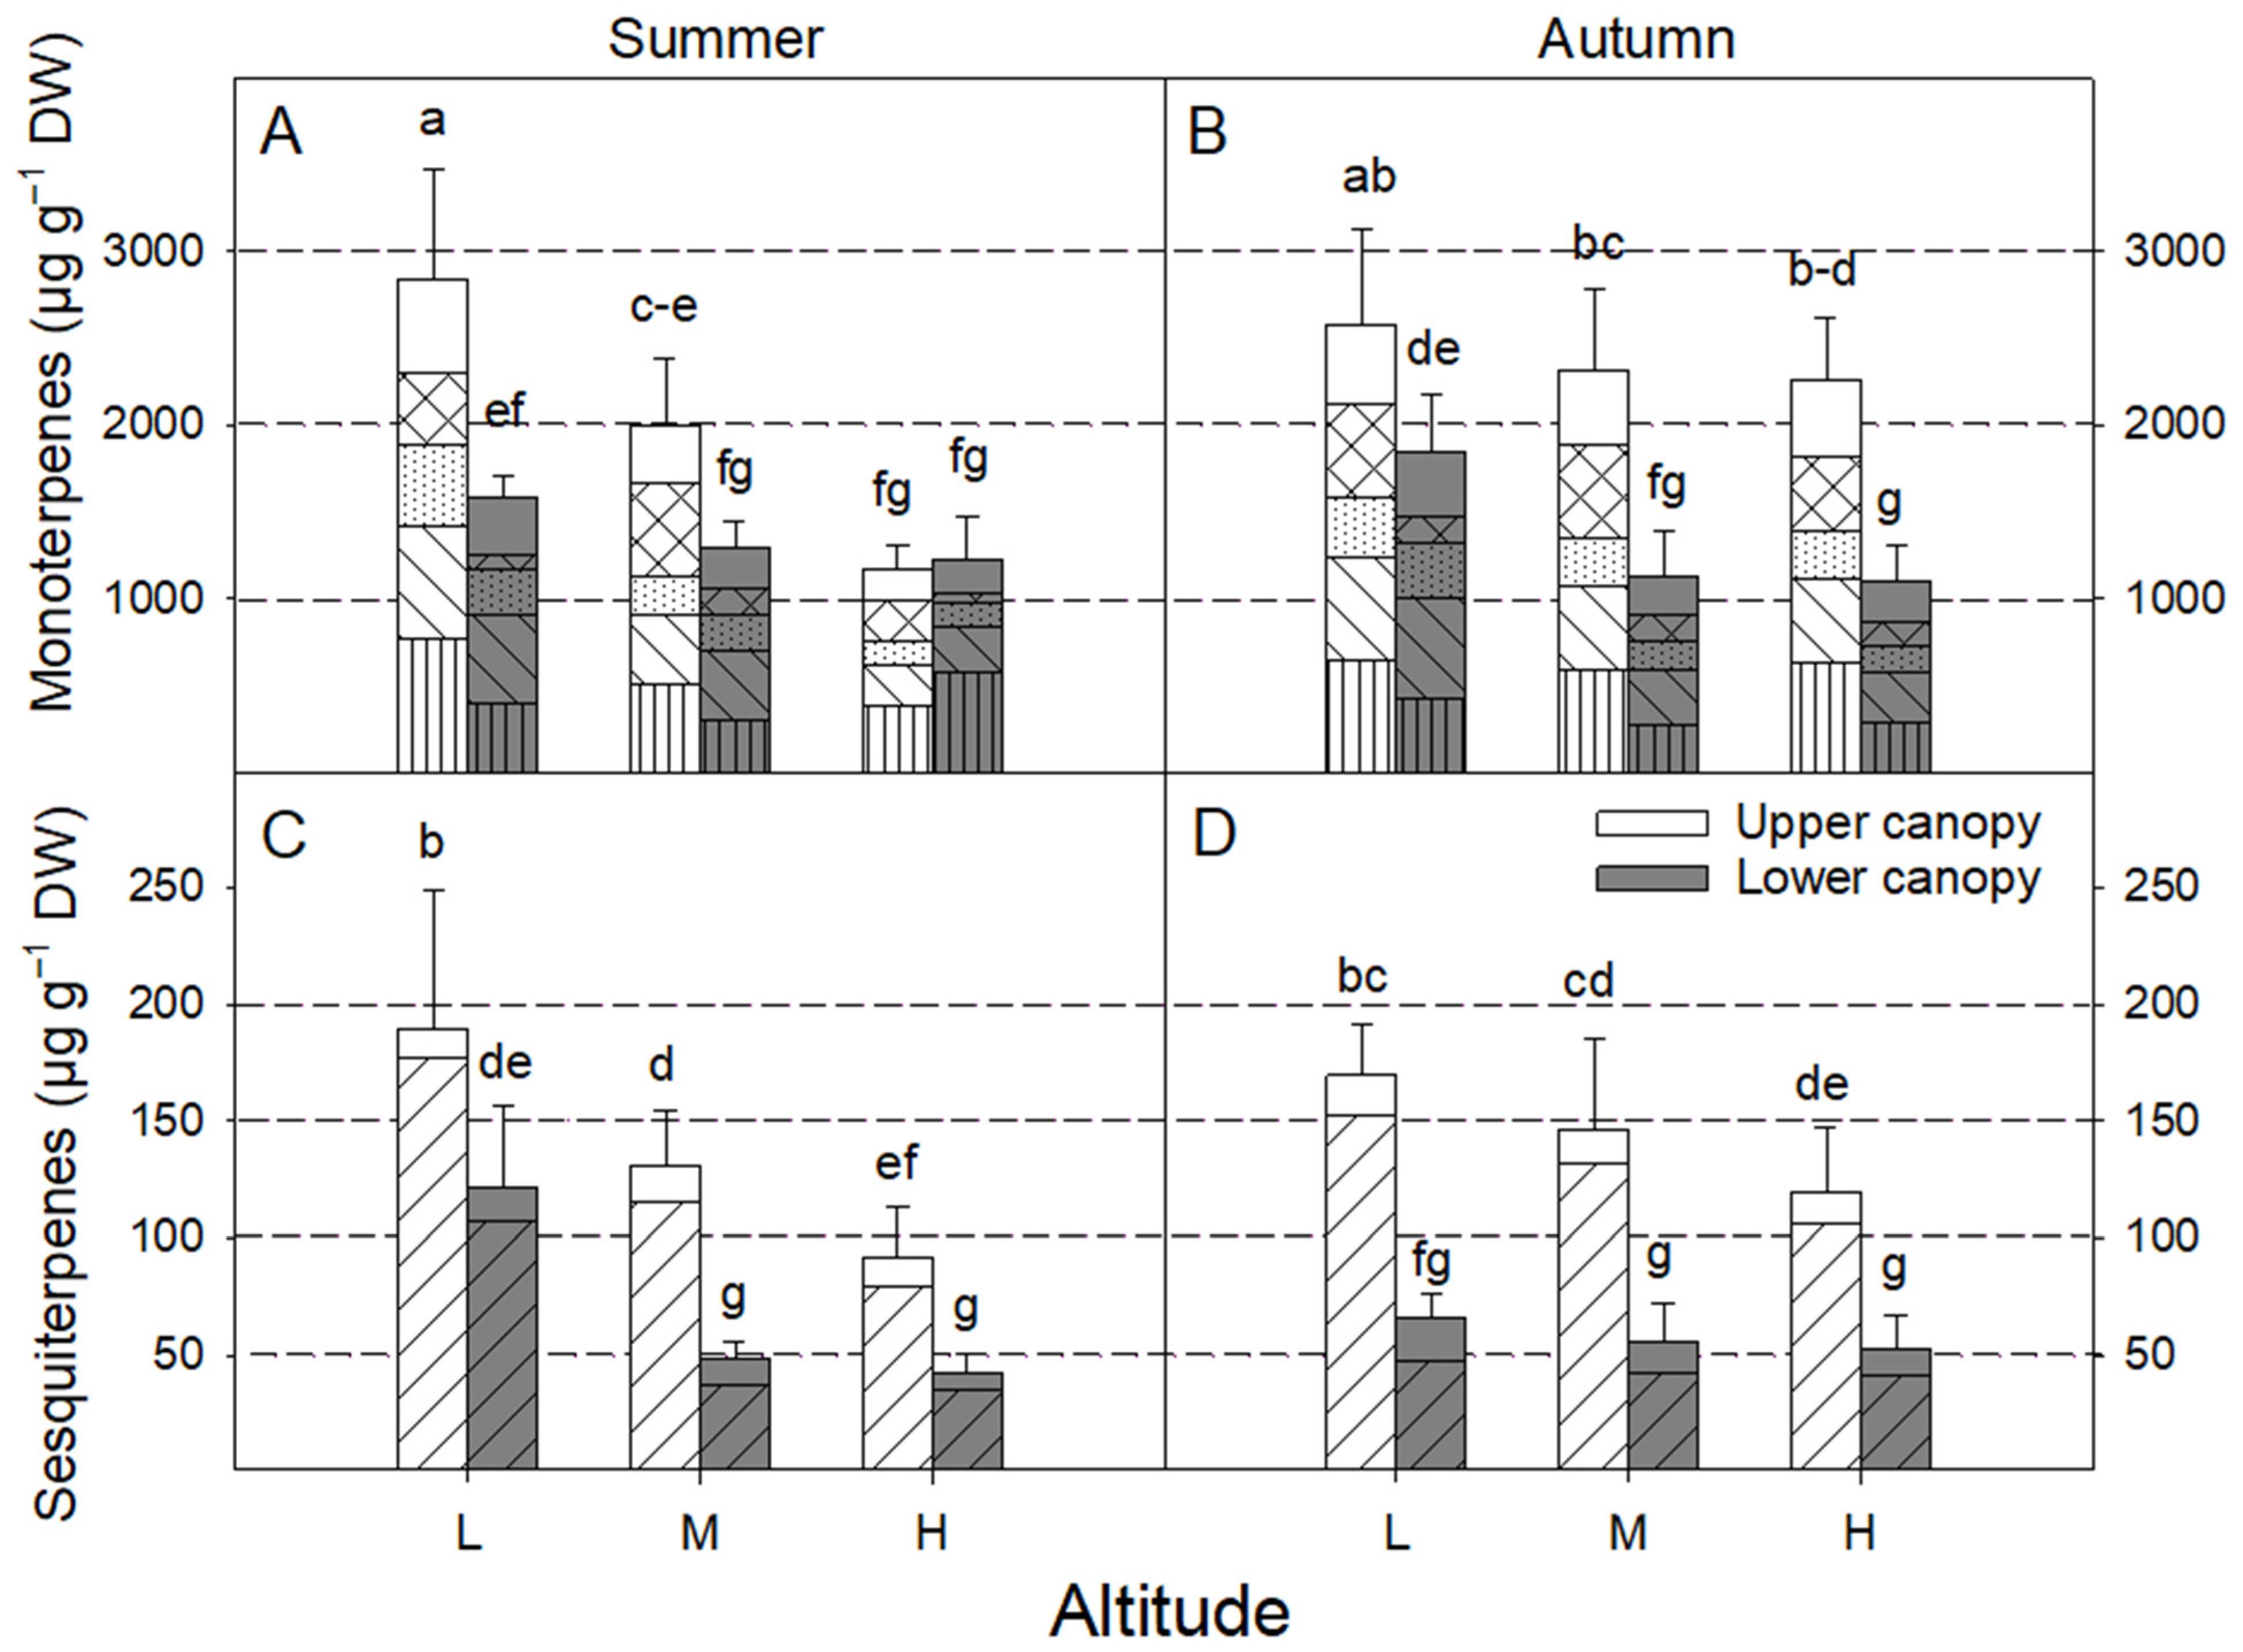 Forests | Free Full-Text | Combined Effect of Altitude, Season and Light on  the Accumulation of Extractable Terpenes in Norway Spruce Needles